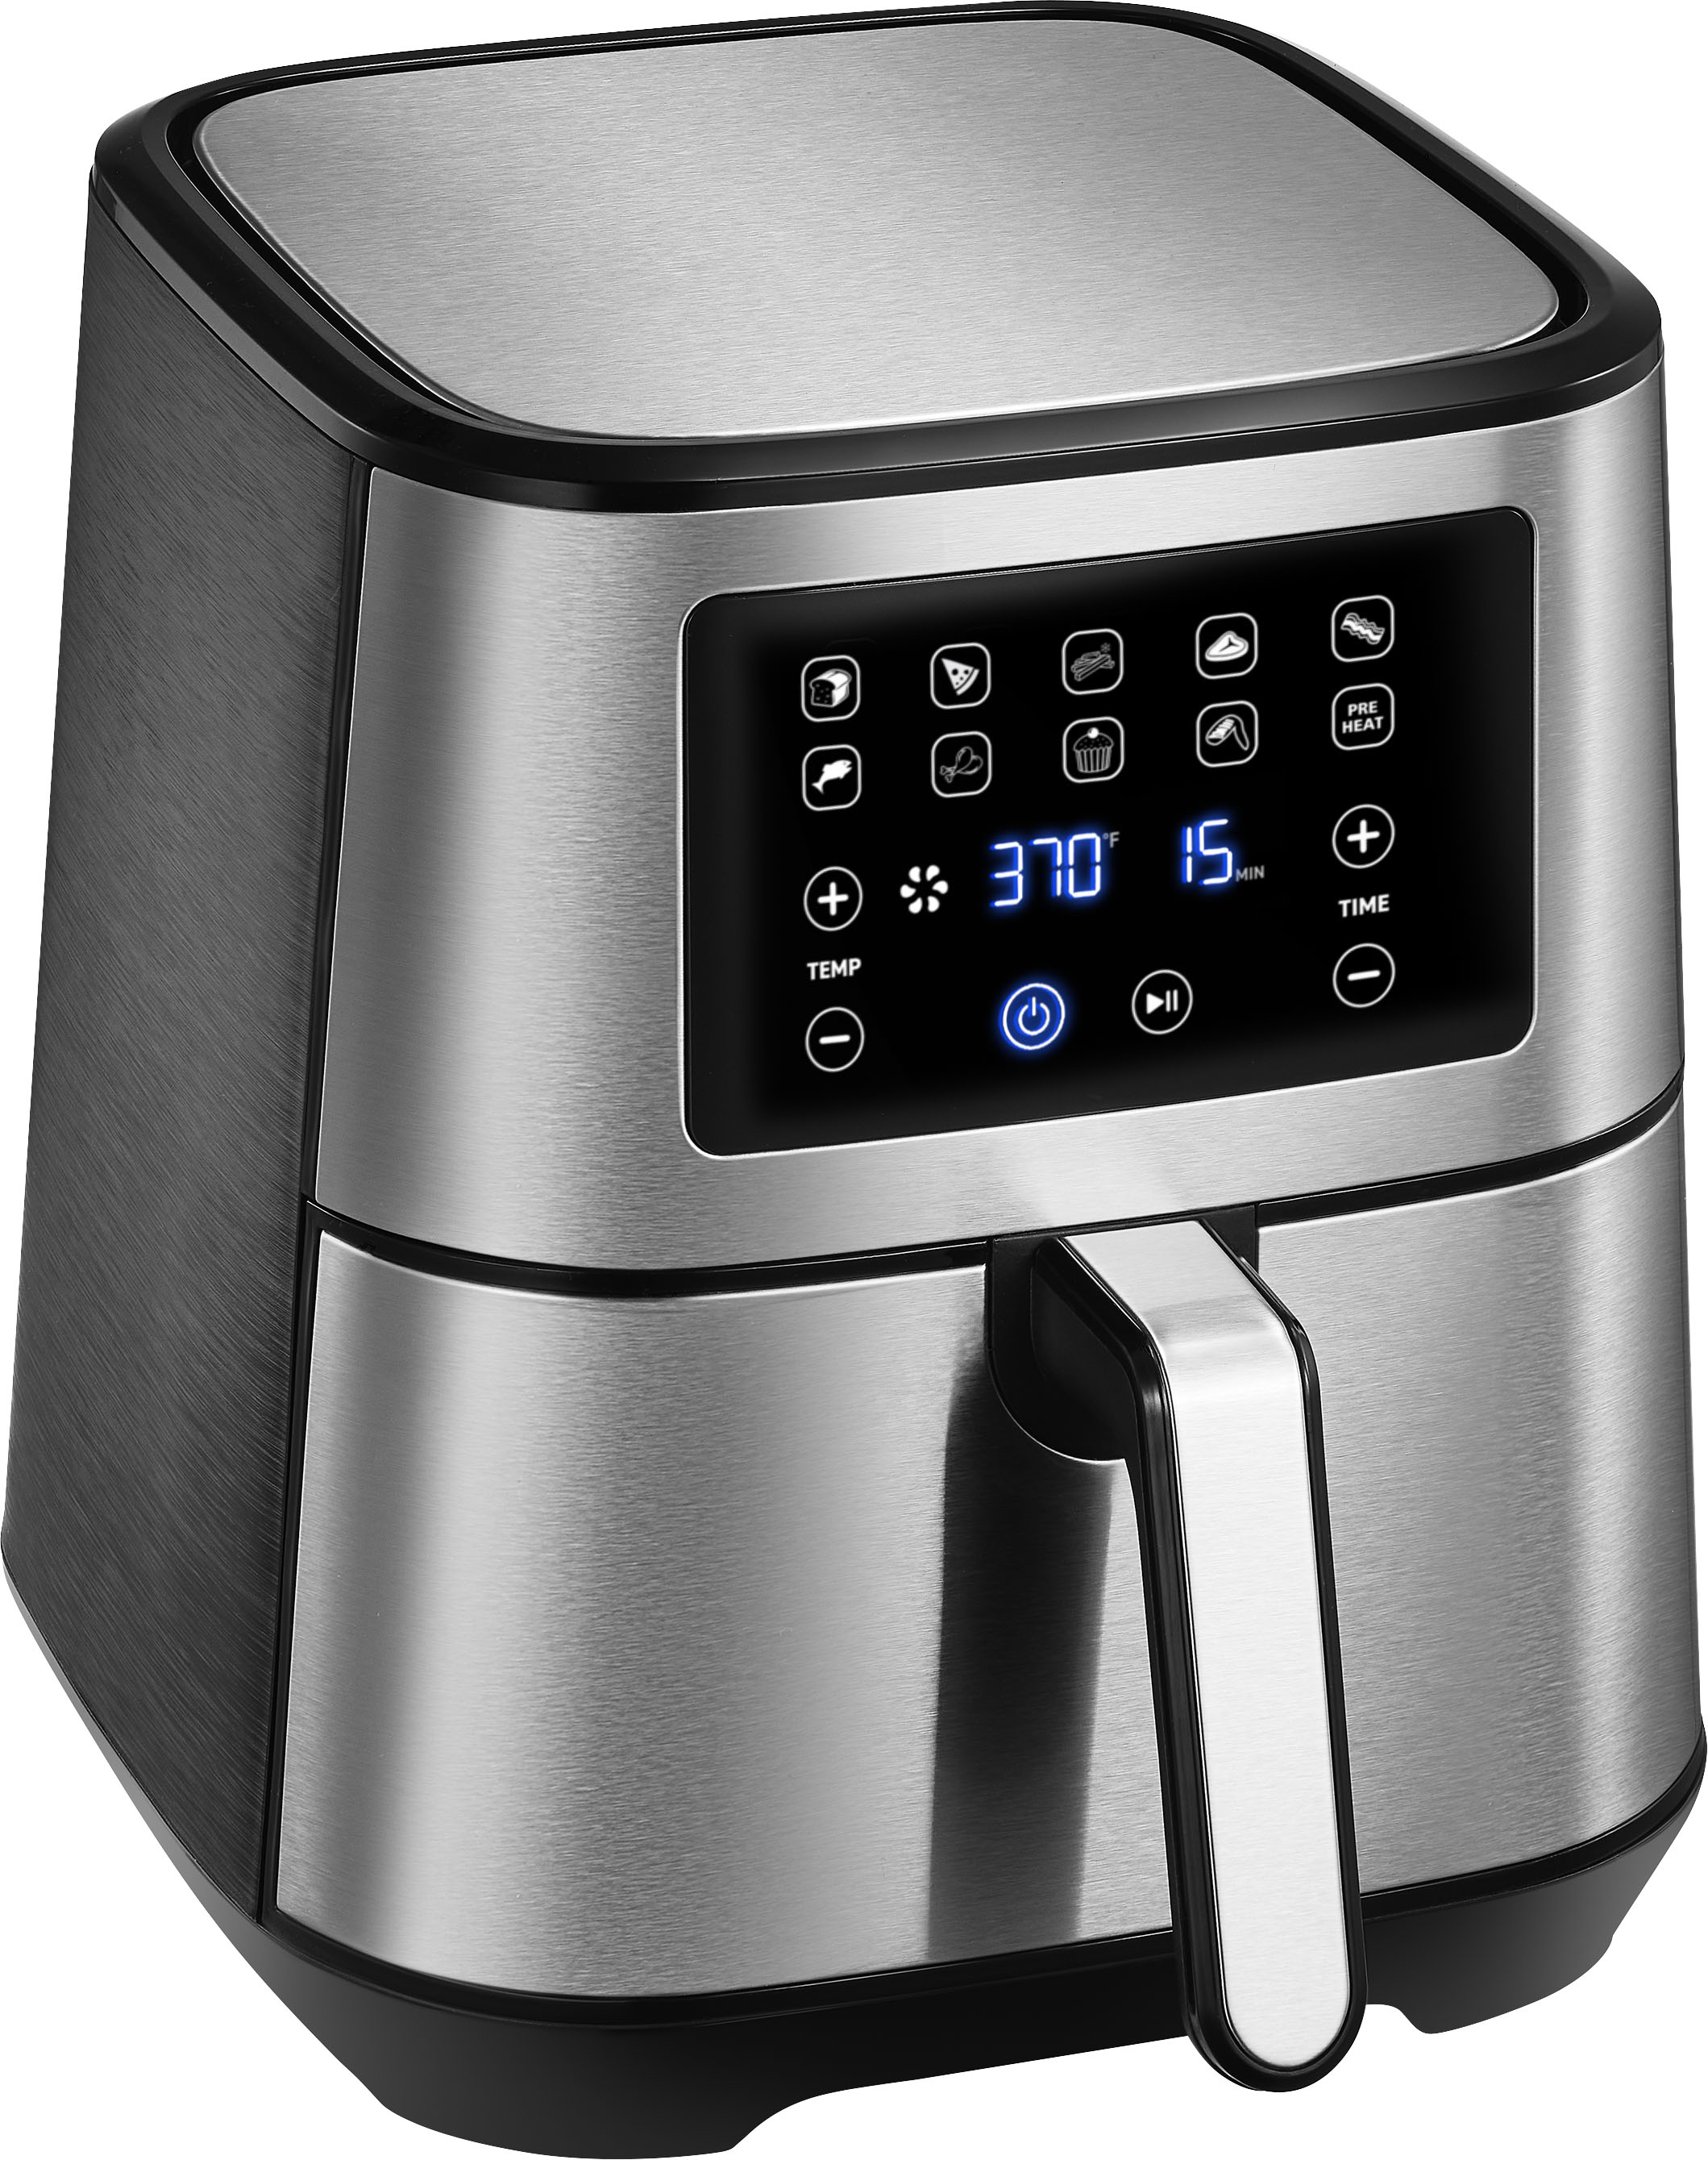 Insignia- 5 Qt. Digital Air Fryer - Stainless Steel - NEW 600603283062